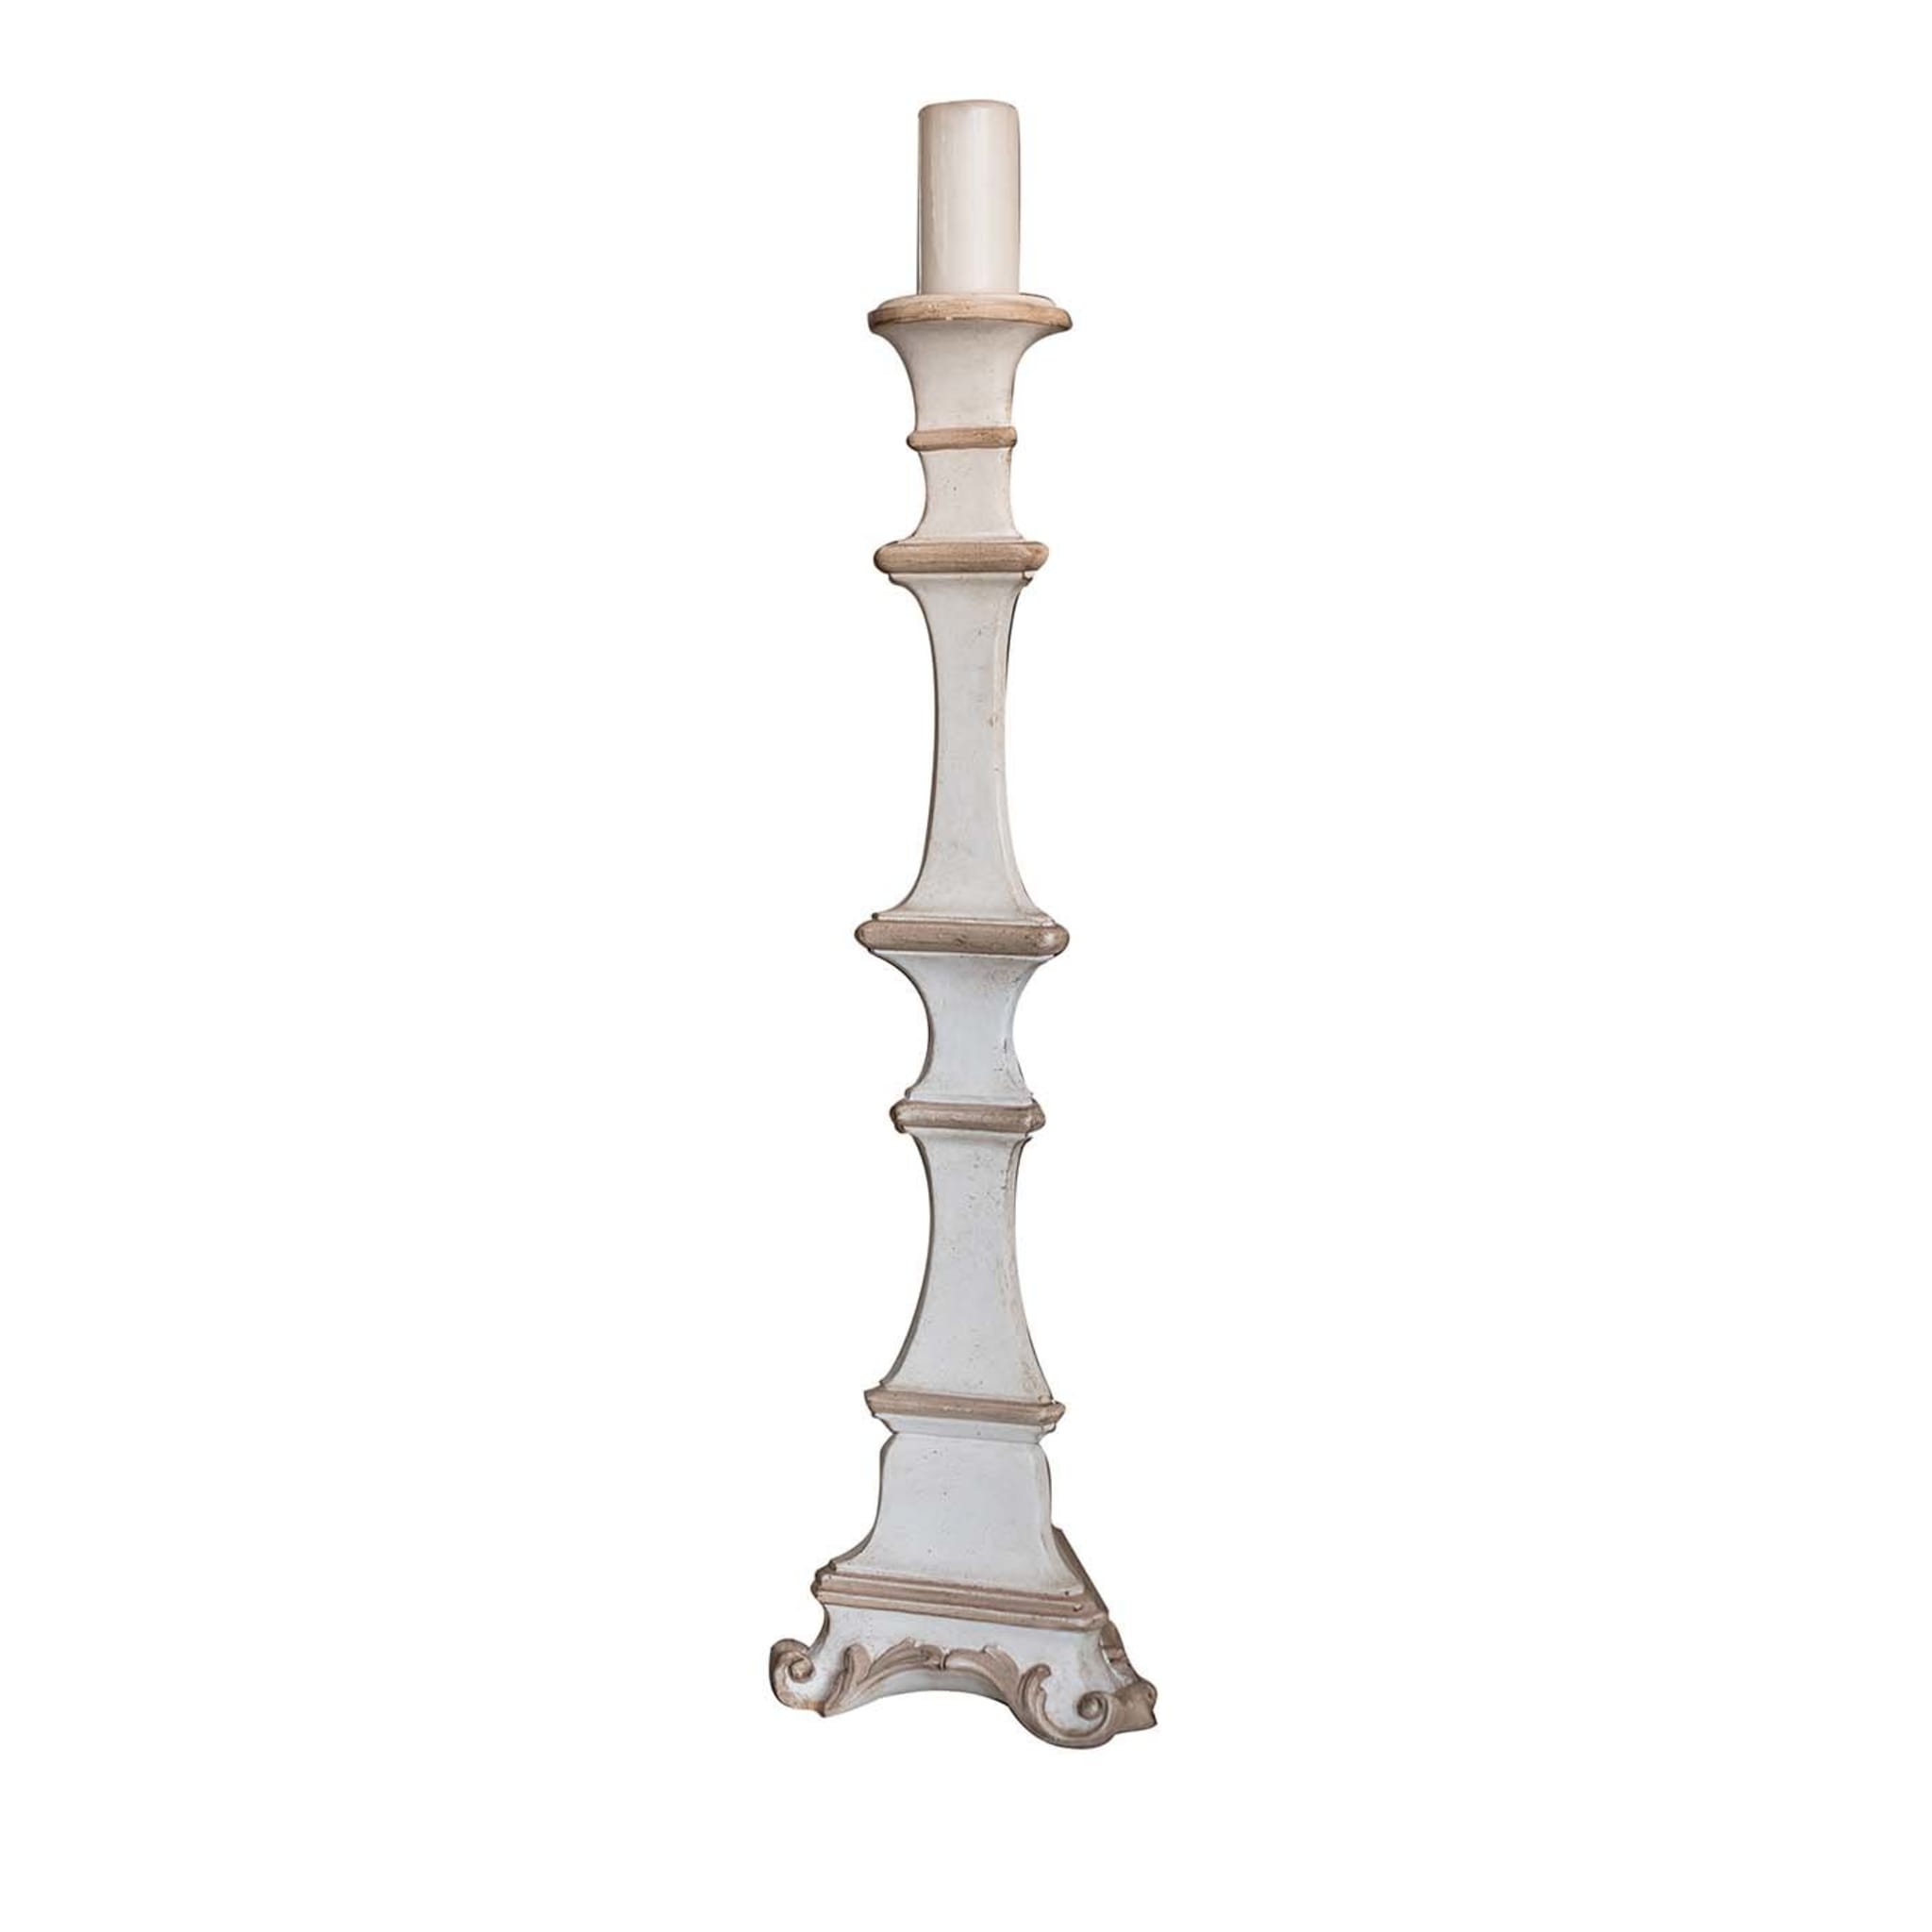 Gubbio candle holder in white wood - Main view